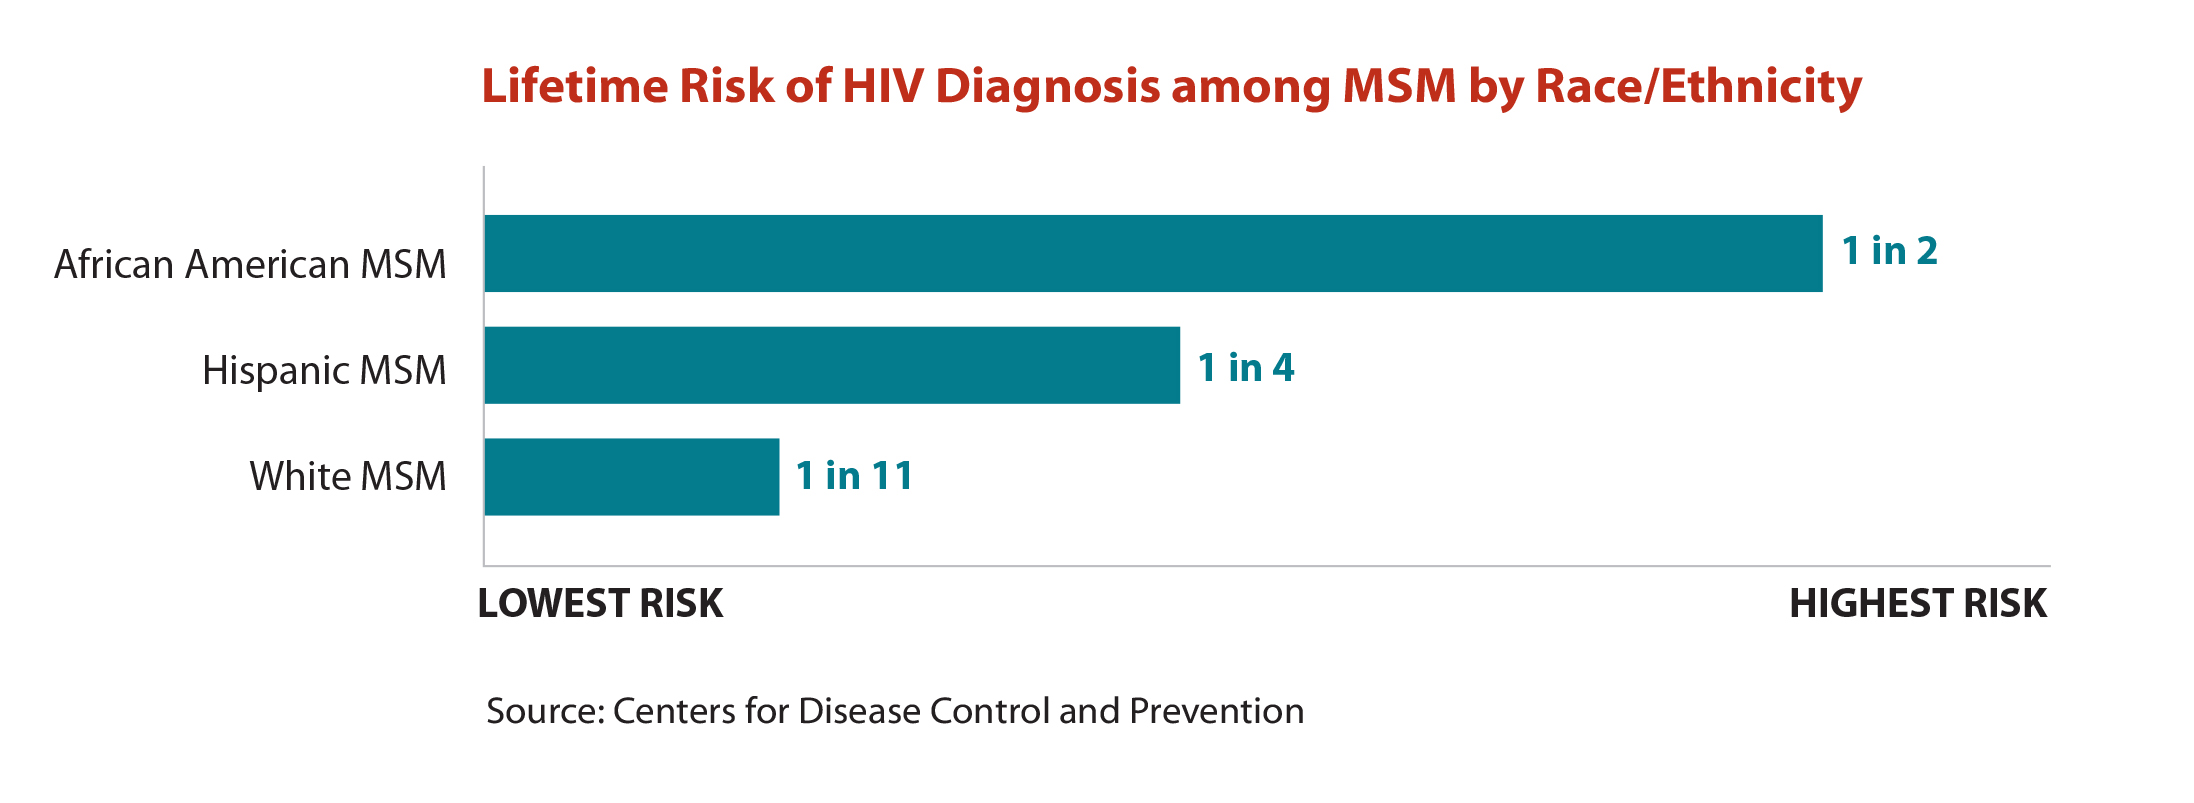 Bar chart of Lifetime risk of HIV Diagnosis among MSM by Race/Ethnicity showing African American MSM have a 1 in 2 lifetime risk of and HIV diagnosis, Hispanic MSM have a 1 in 4 risk, and white MSM have a 1 in 11 risk.